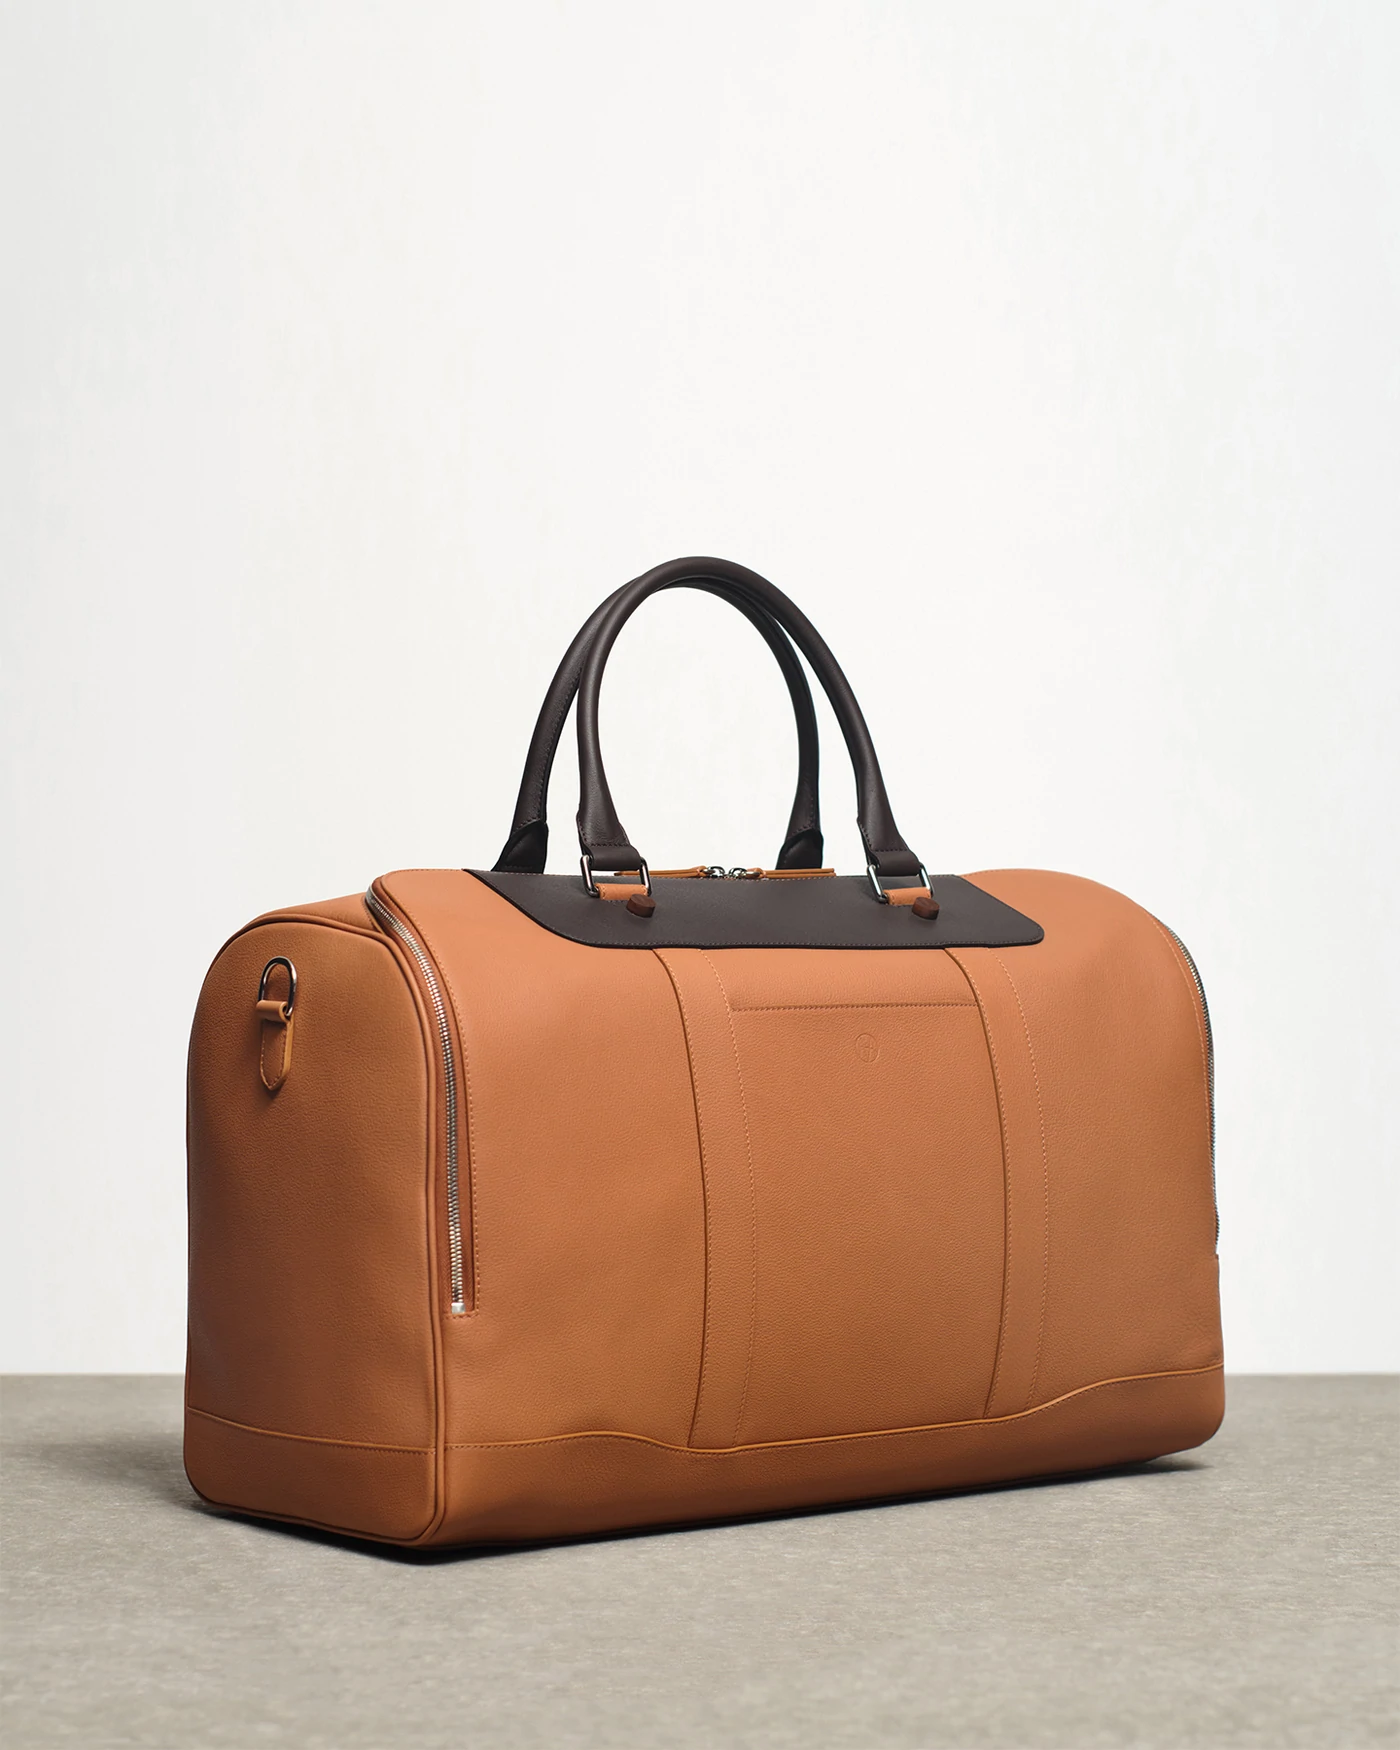 COOPERS DUFFLE HONEY/CACAO BROWN